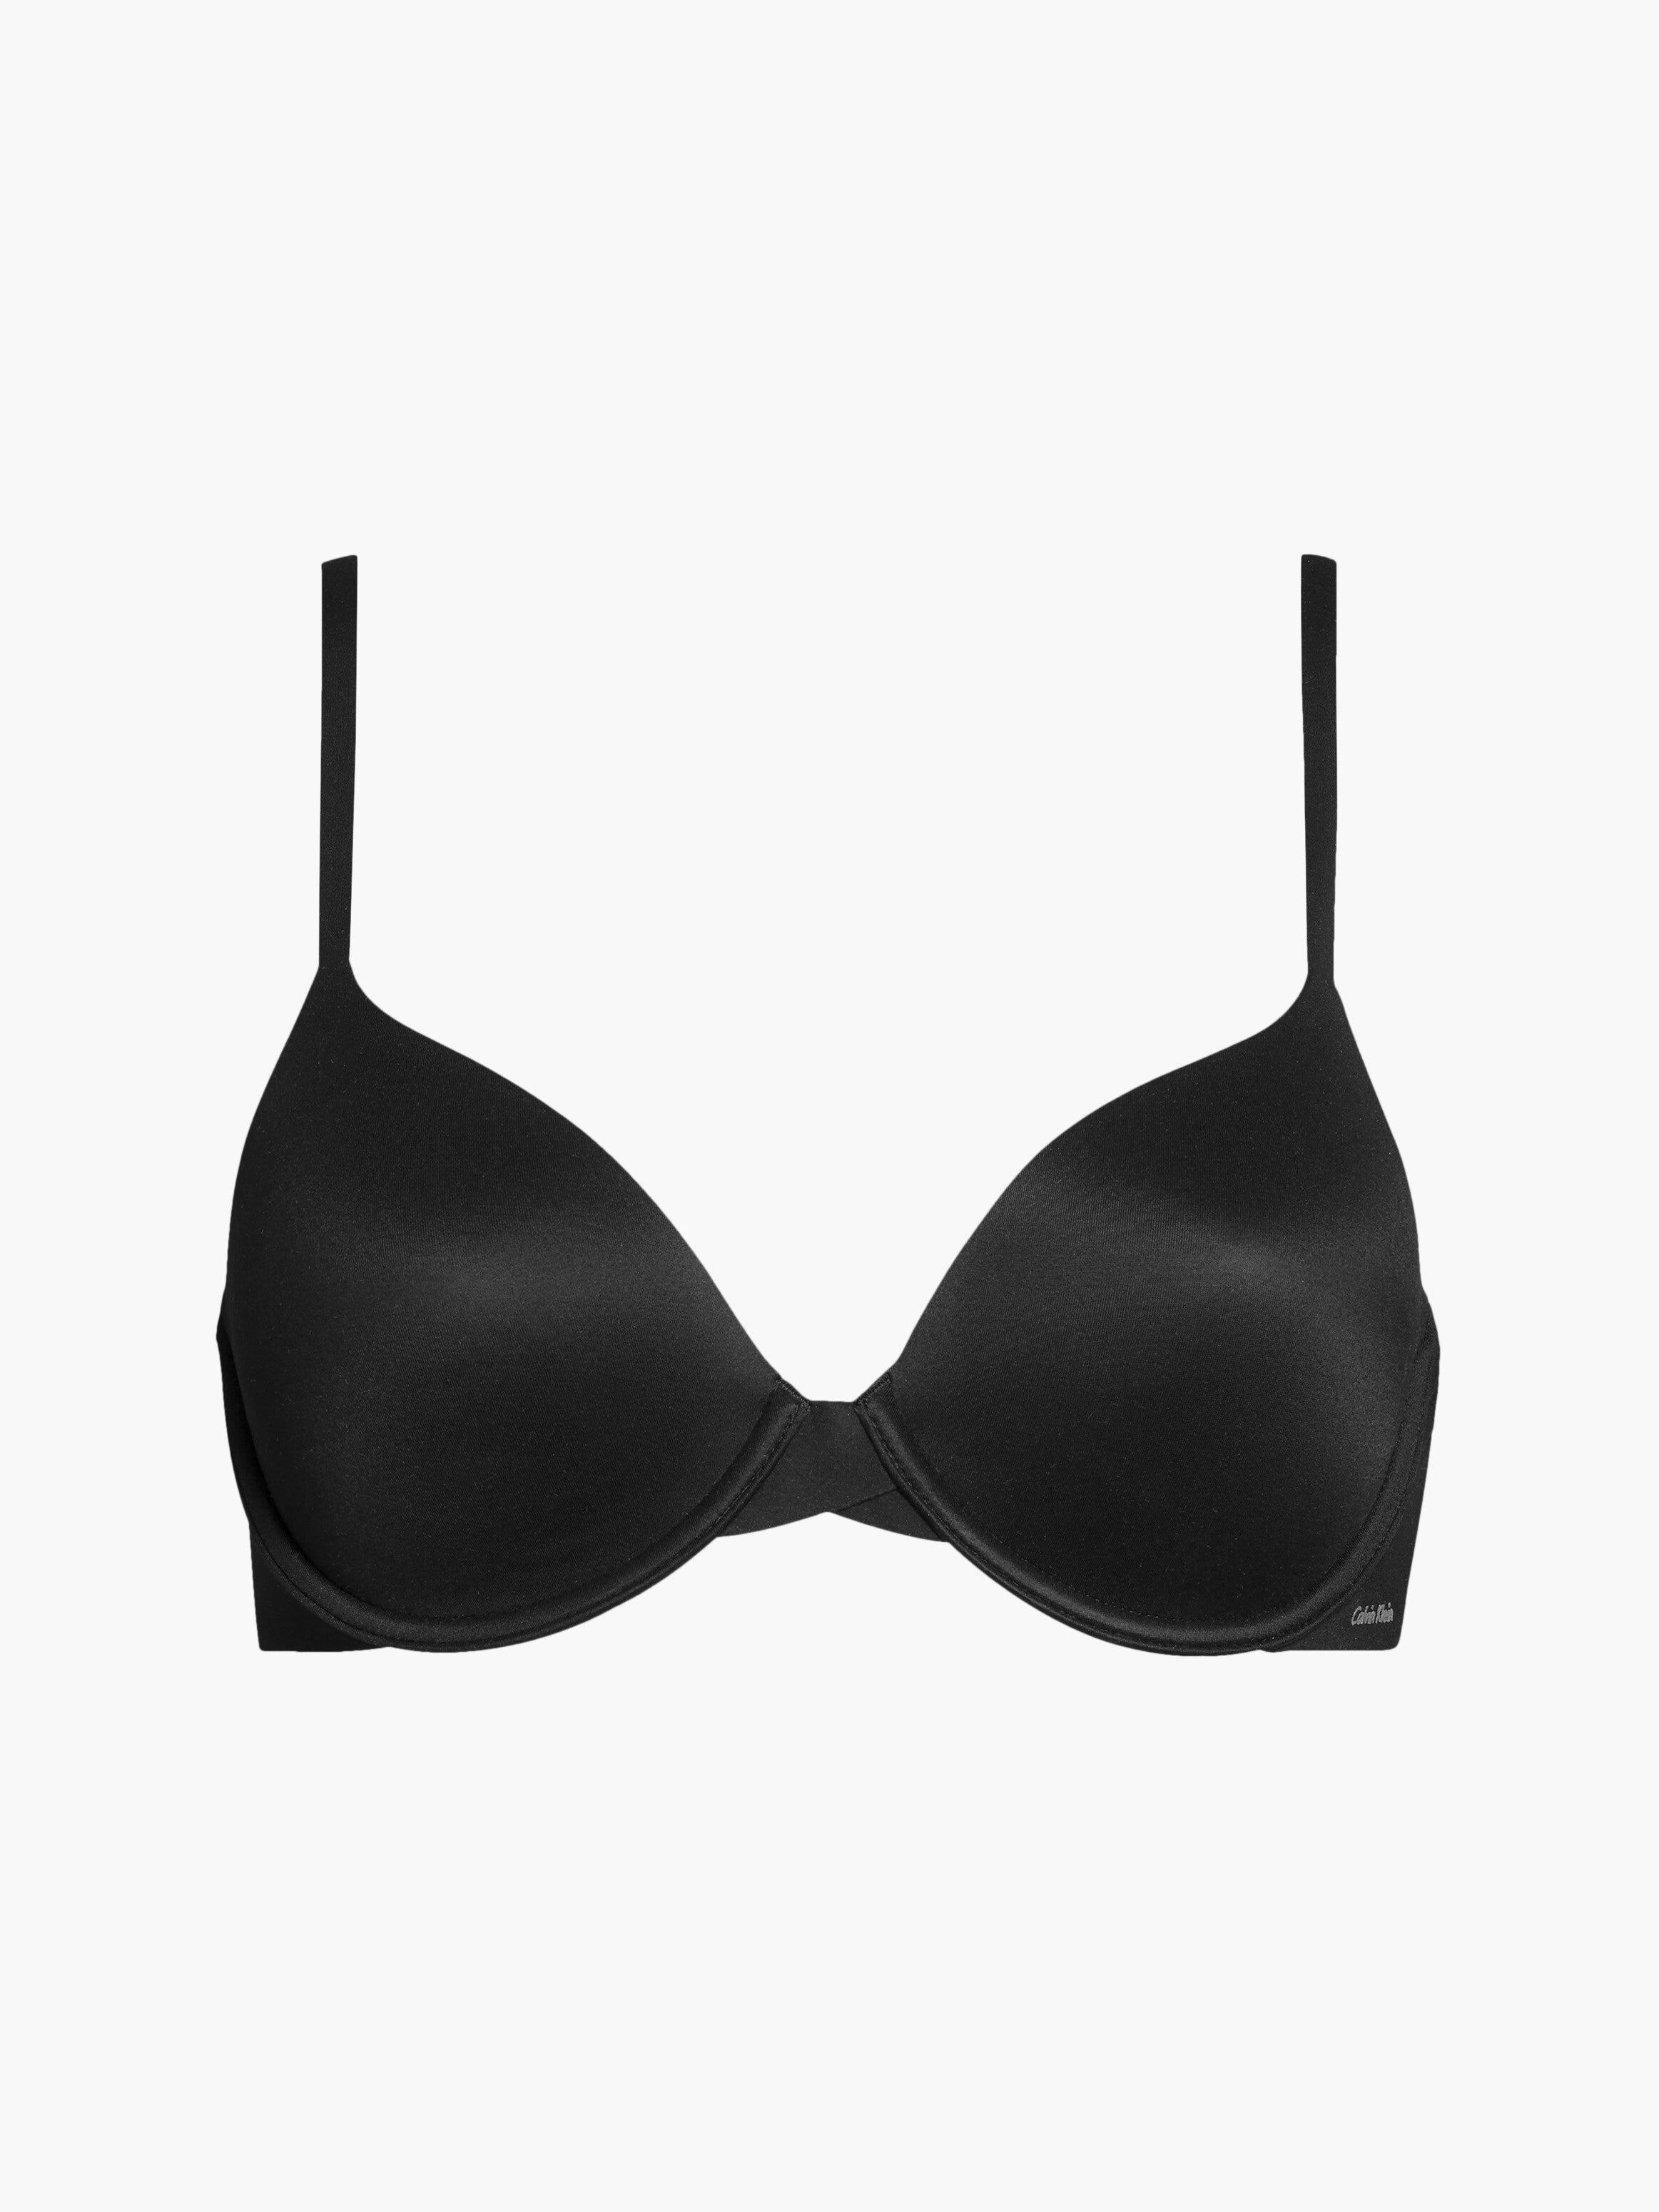 Perfectly Fit T-Shirt Bra